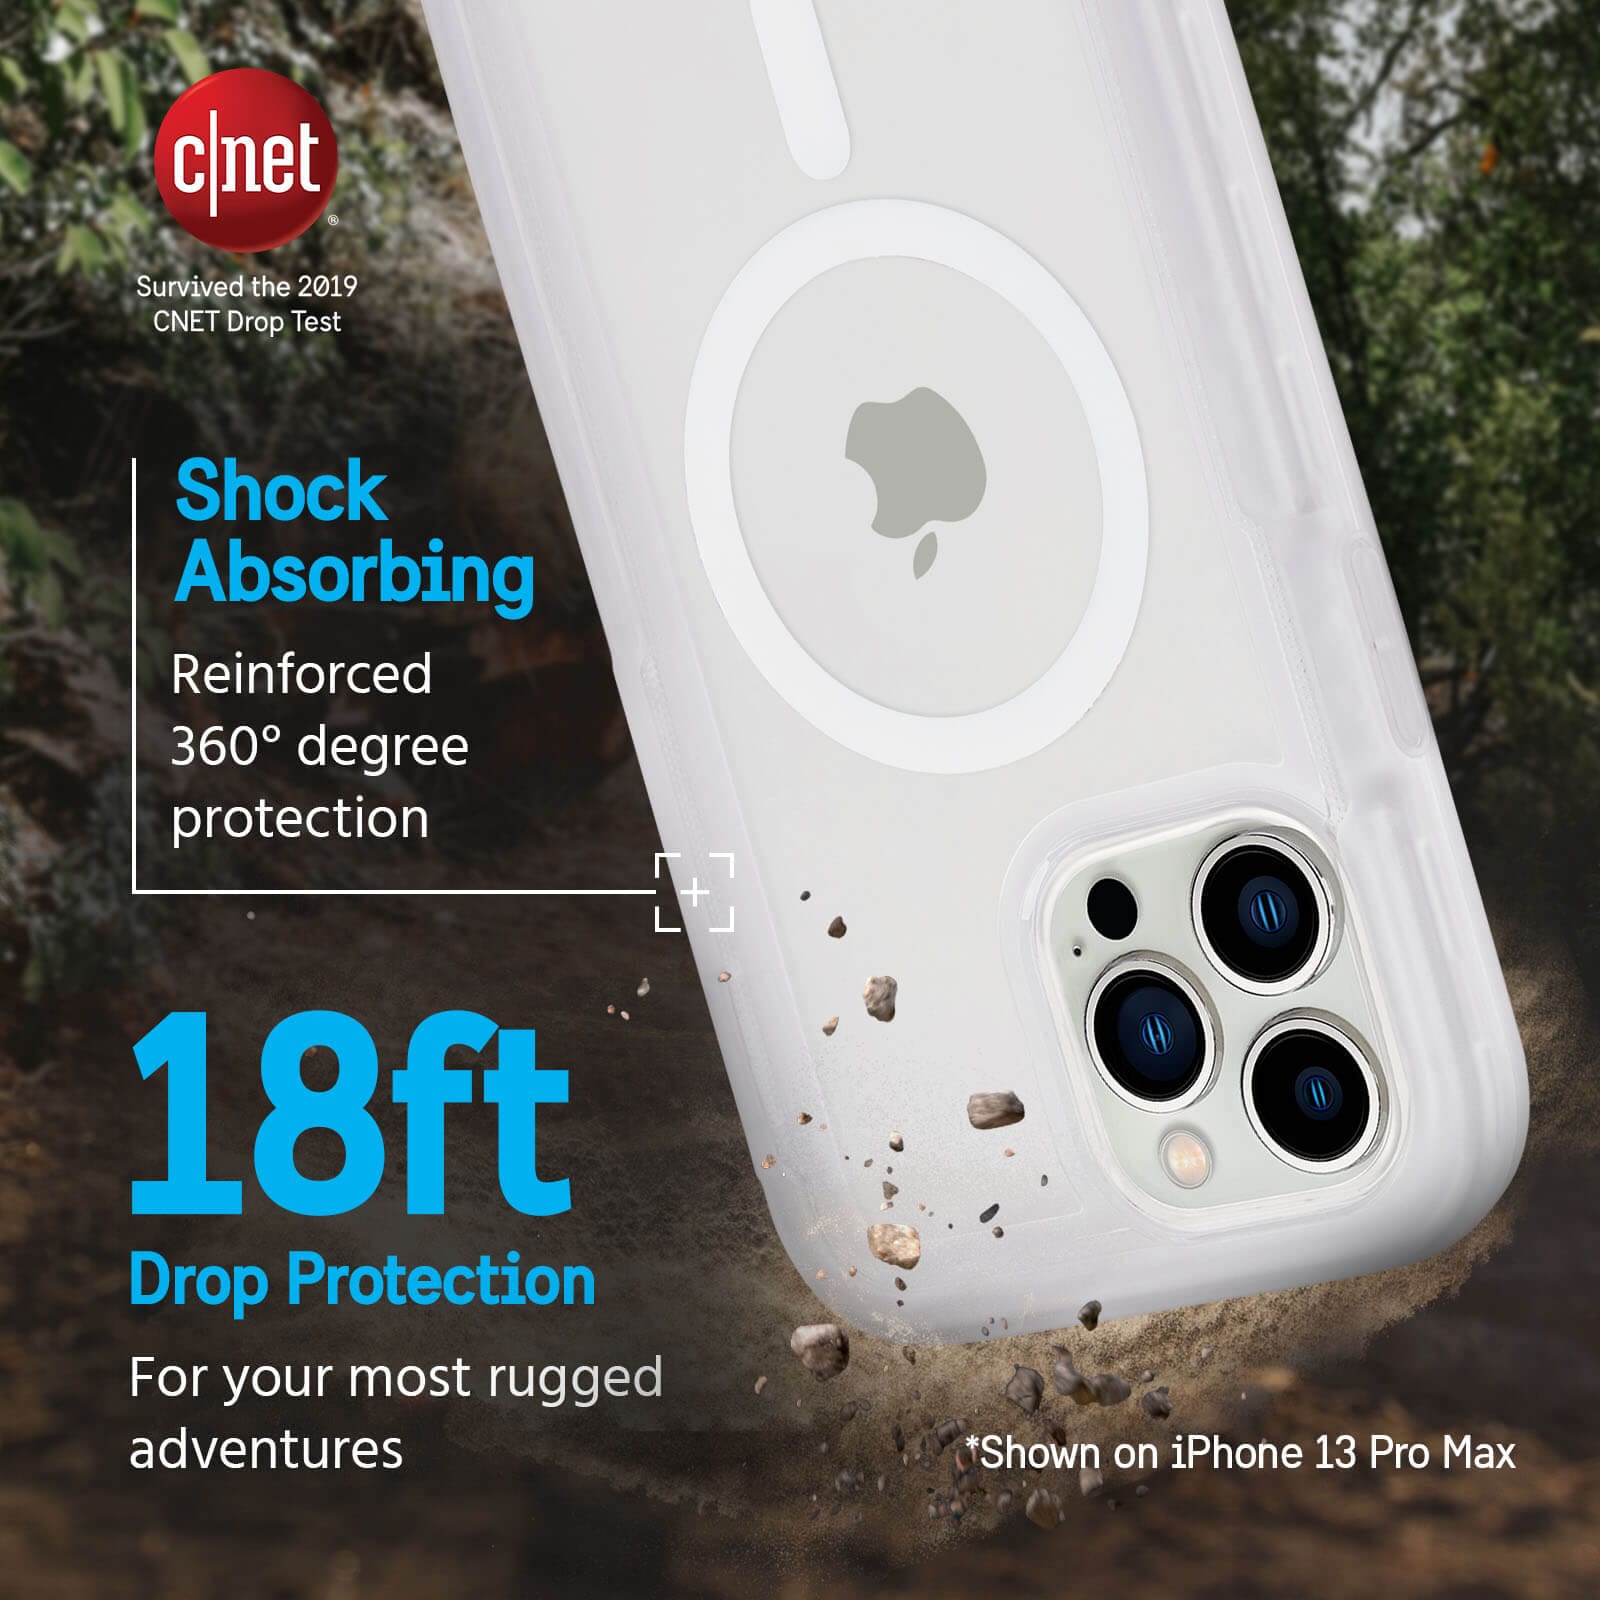 Survived 2019 CNET drop test. Shock absorbing reinforced 360 degree protection. 18ft drop protection for your most rugged adventures. color::Clear